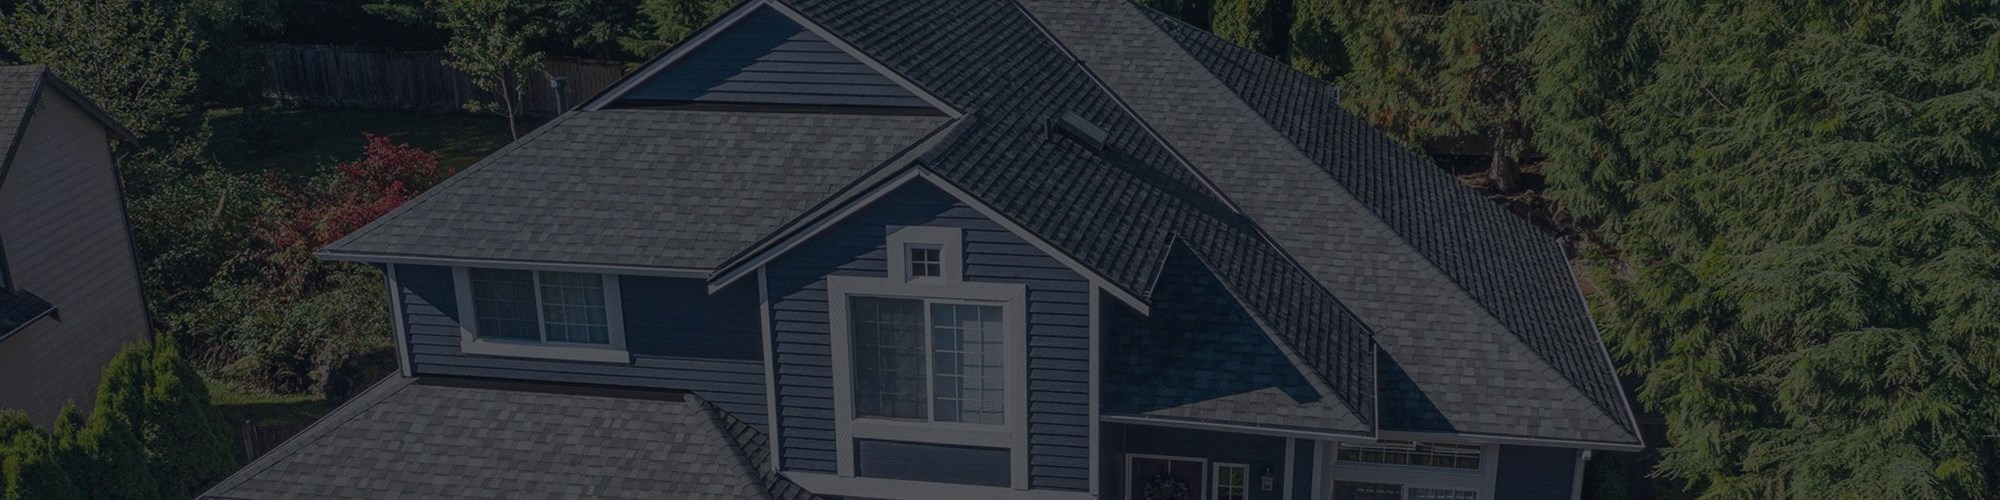 Roofing for real estate investors in Seattle, Washington